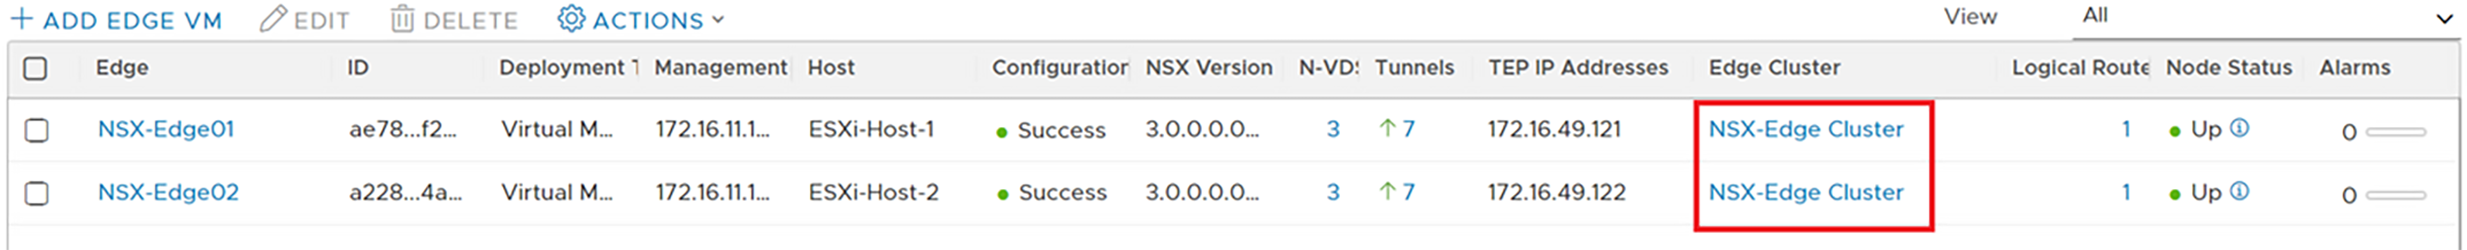 NSX Edge VMs and Edge Cluster